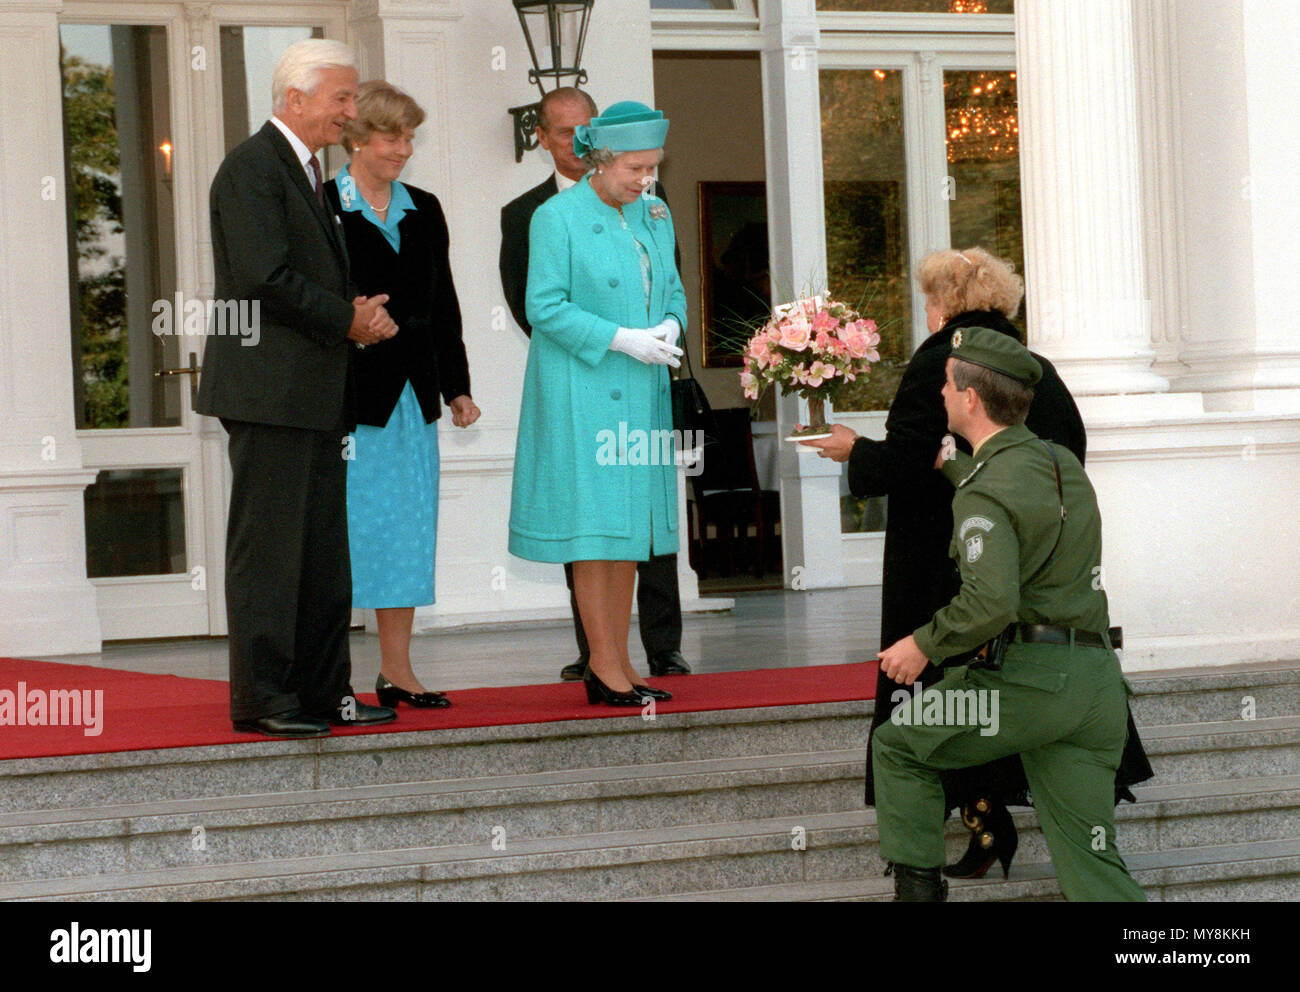 Irma Oettinger (r), an admirer of the Queen from Langenbrettbach near Heilbronn, accompanied by a member of the Federal Border Guard (BGS), hands a bunch of flowers to British Queen Elizabeth II on the terrace of Villa Hammerschmidt in Bonn, Germany, on 19 October 1992. Standing on the left are German President Richard von Weizsäcker and his wife Marianne, in the background is Prince Philip. | usage worldwide Stock Photo